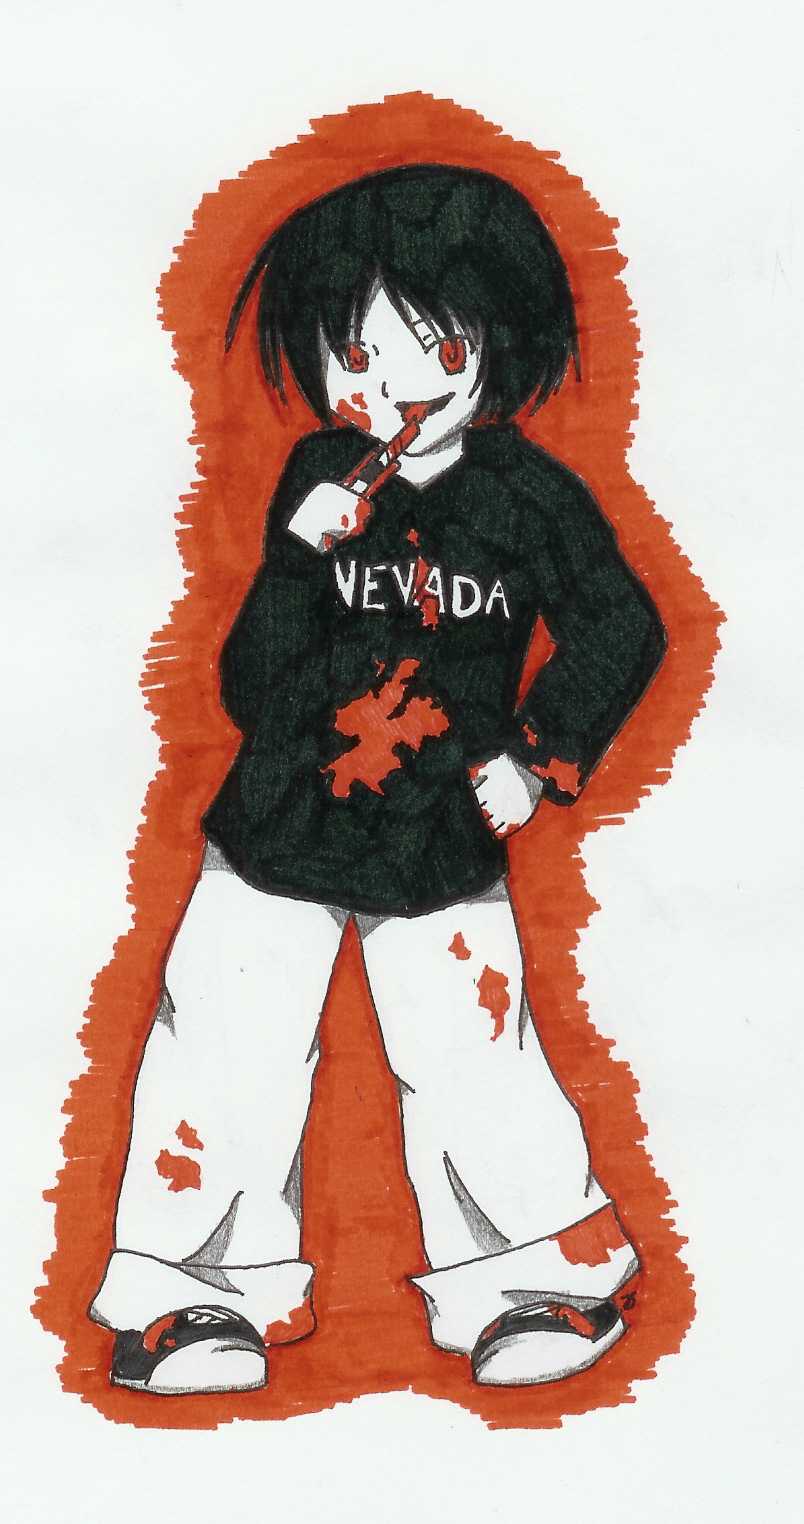 Nevada tan by pucca-tan on DeviantArt